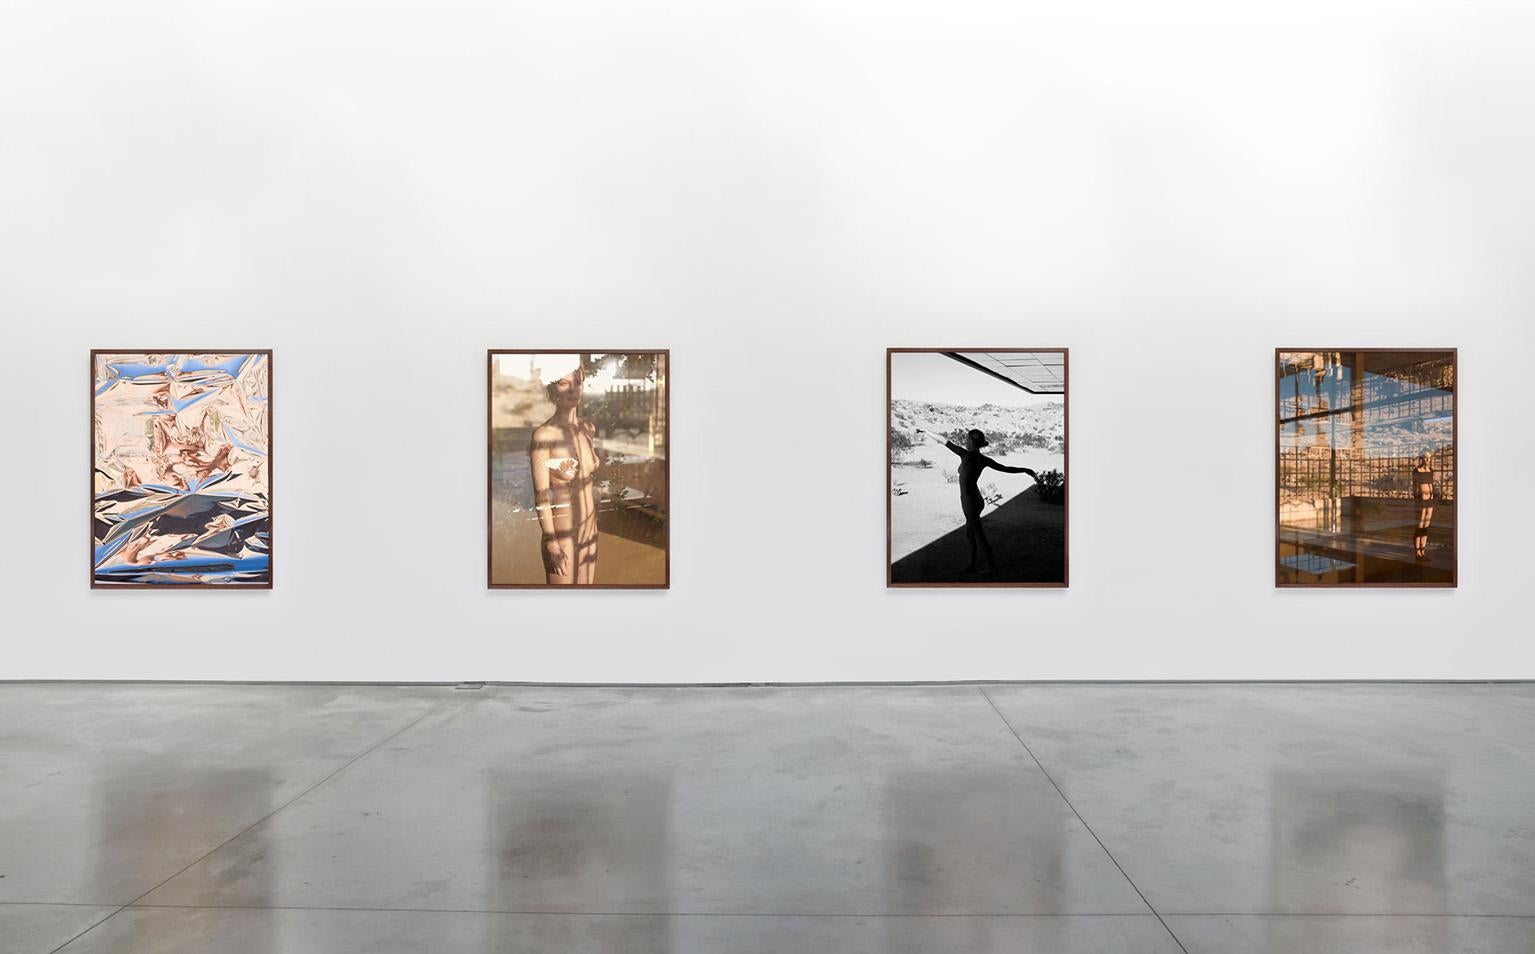 She Disappeared into Complete Silence (AD6329) - figurative landscape photograph - Photograph by Mona Kuhn